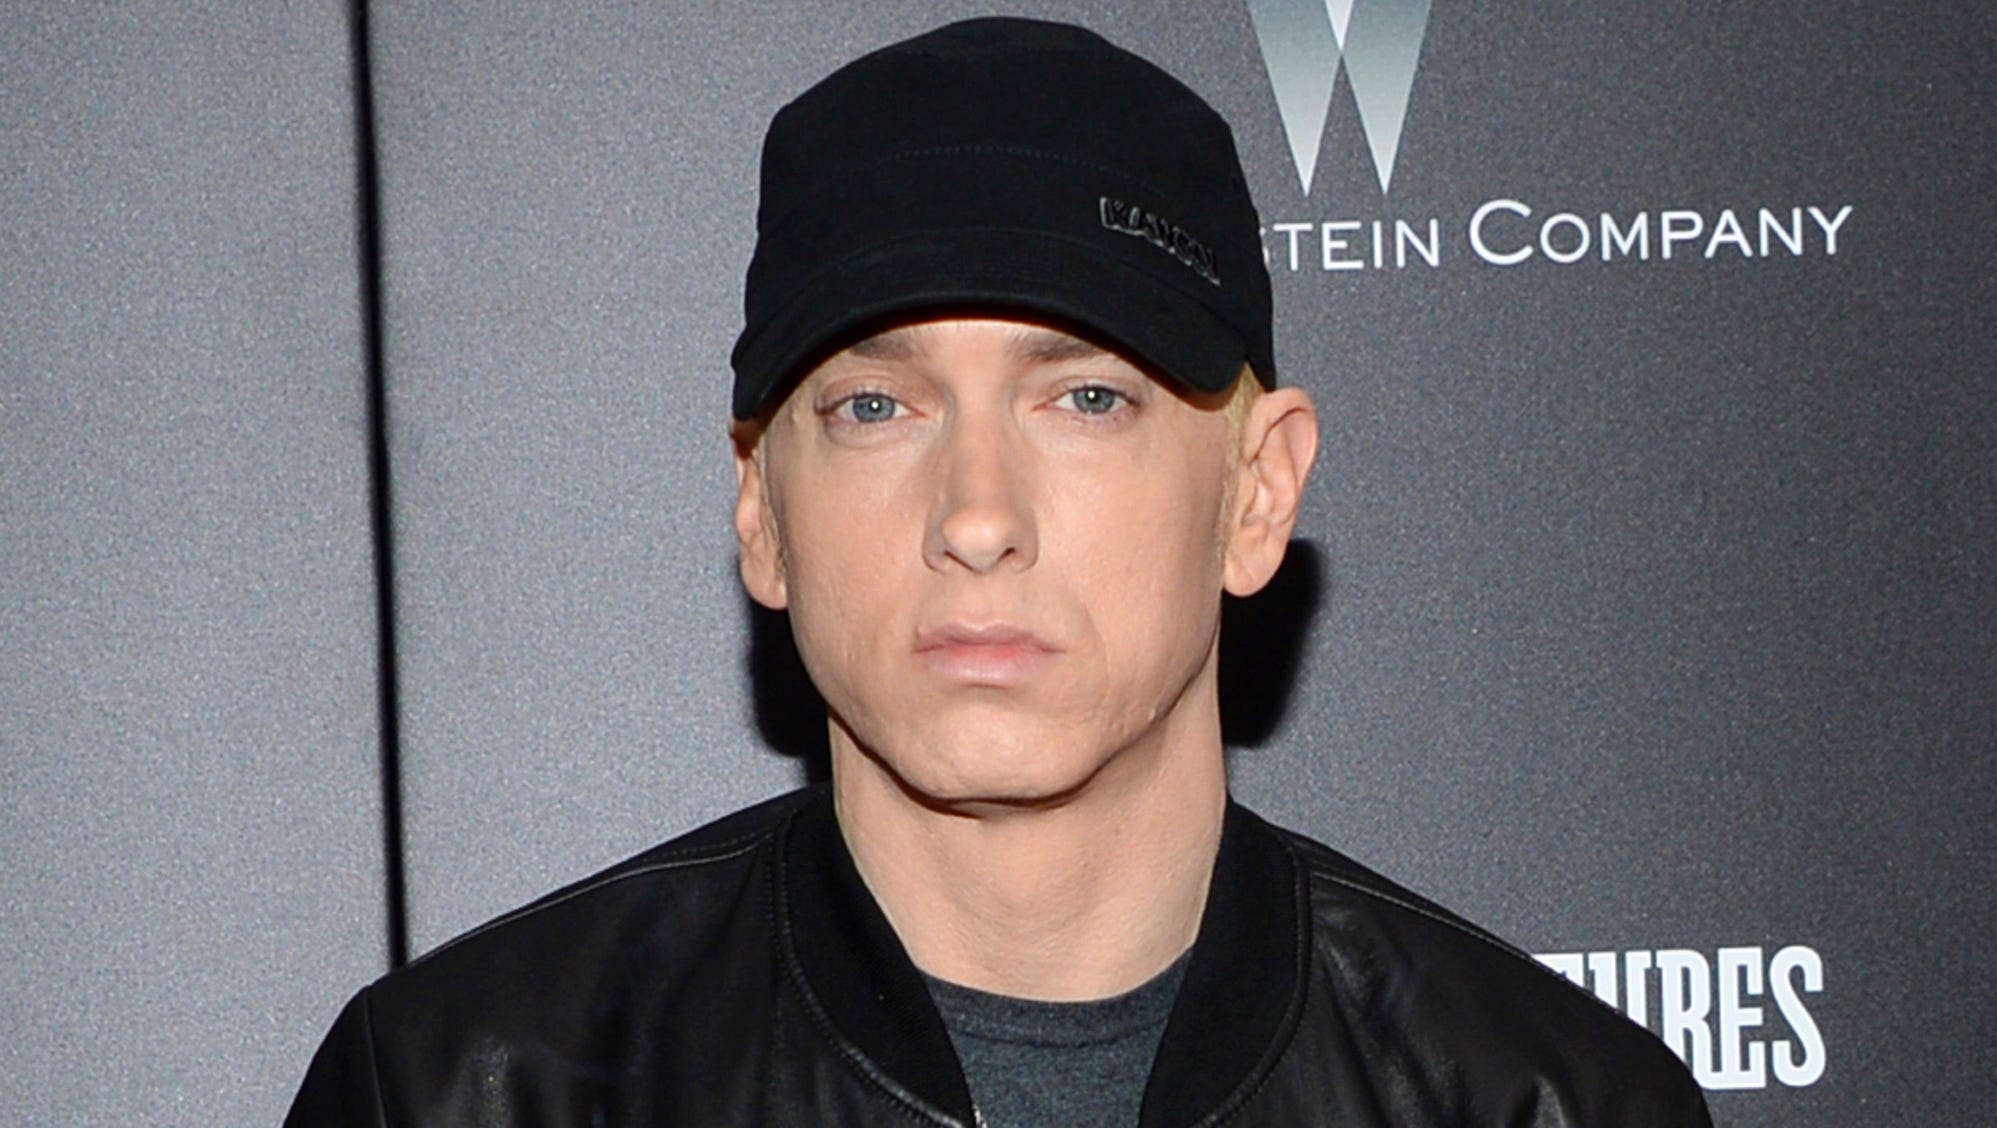 Eminem dating now who is The truth